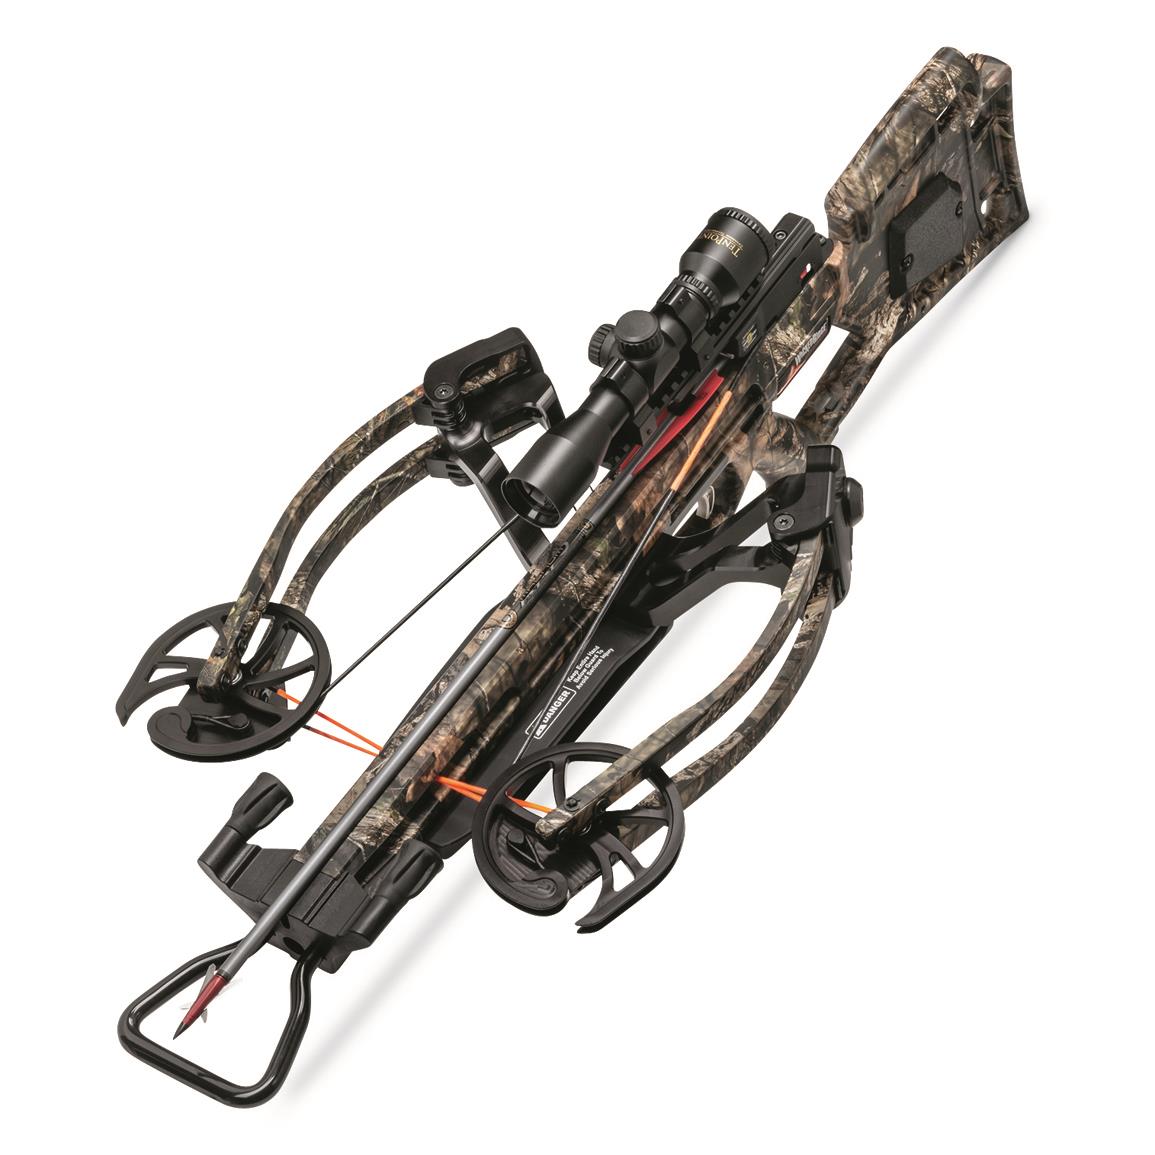 Wicked Ridge RDX 400 Crossbow Package 710590, Crossbows at Sportsman